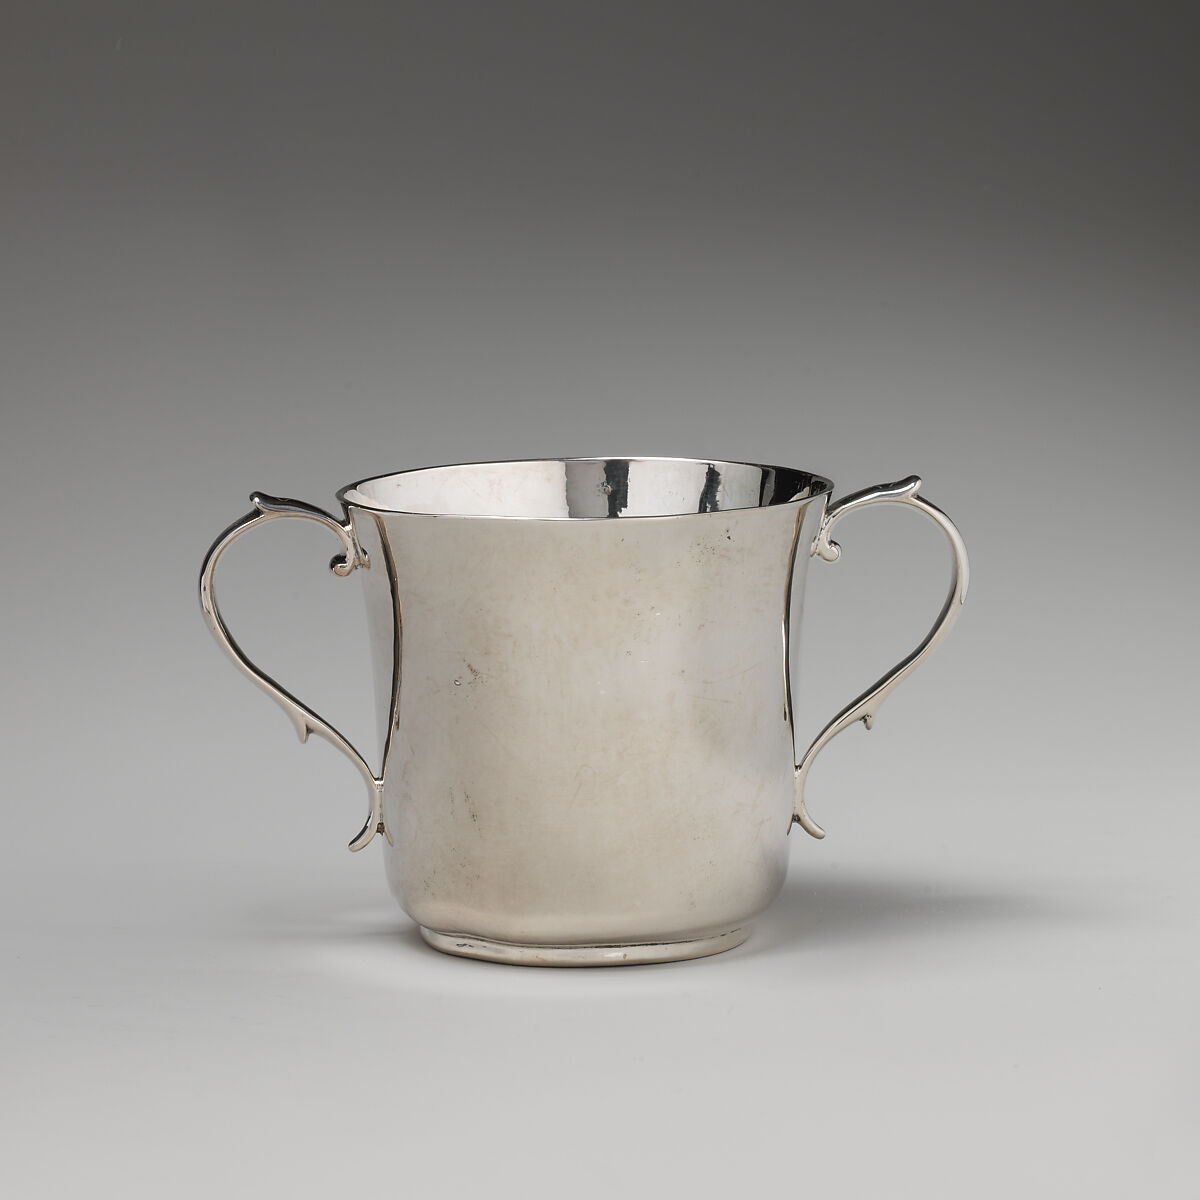 Two-handled cup, R. M., London (ca. 1651–1662), Silver, British, London 